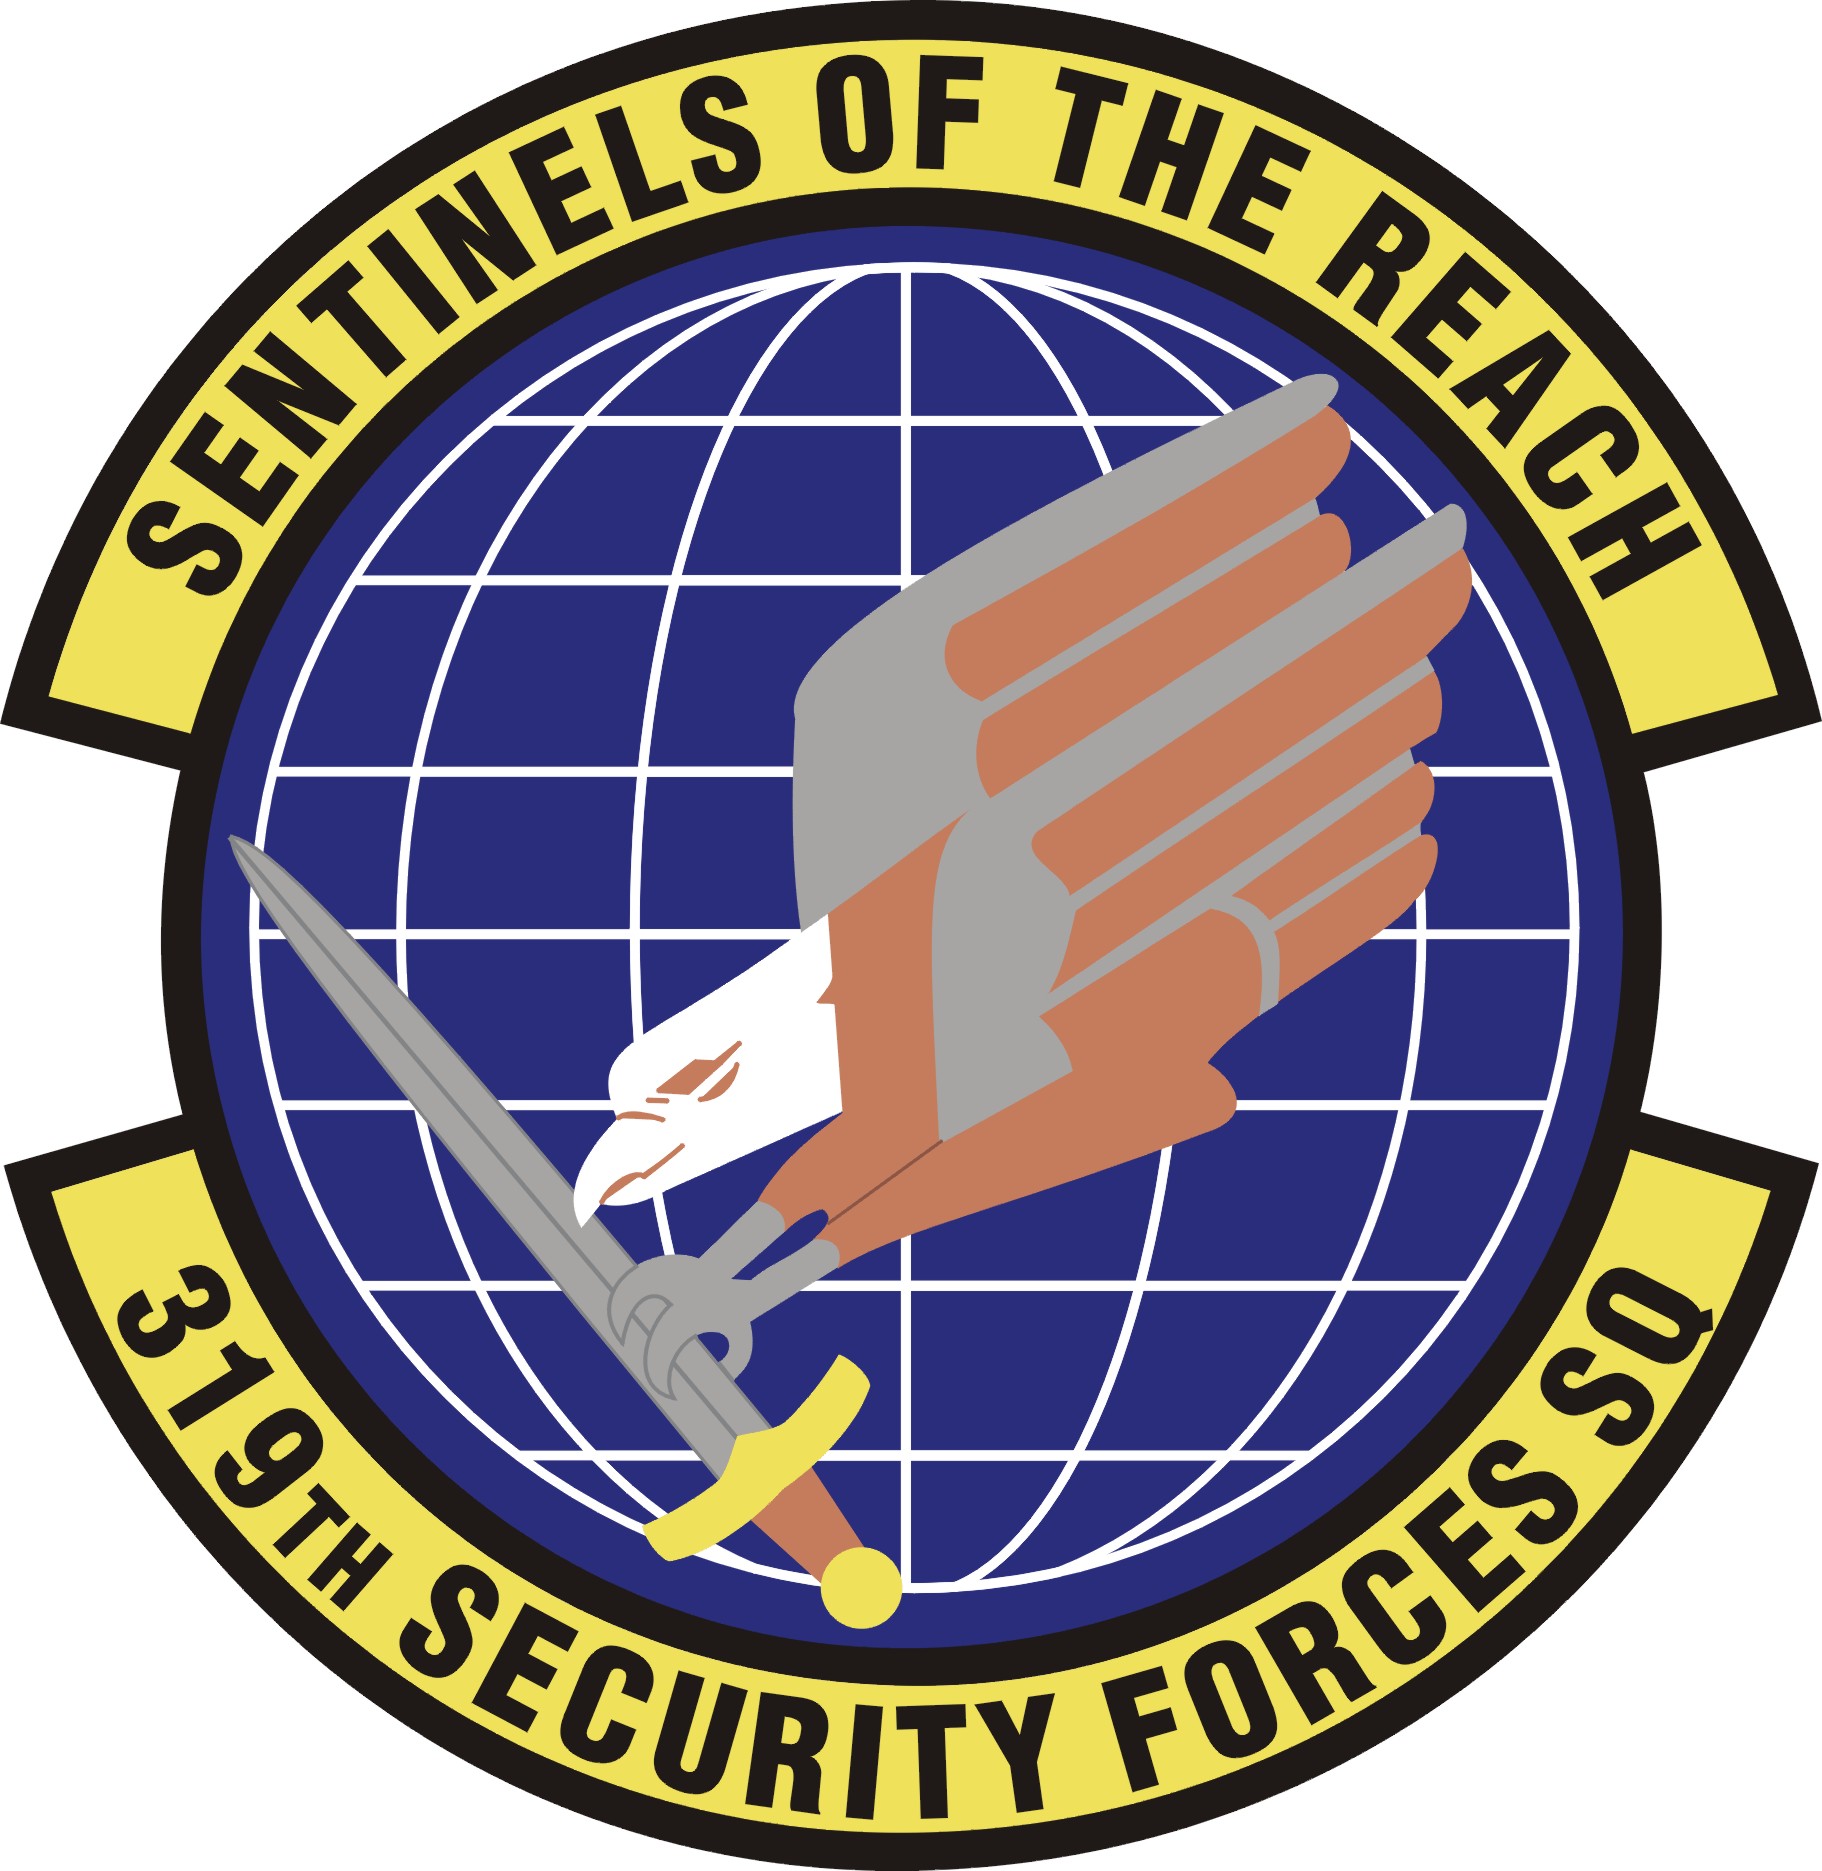 This is an image of the 319th Security Forces Squadron seal.